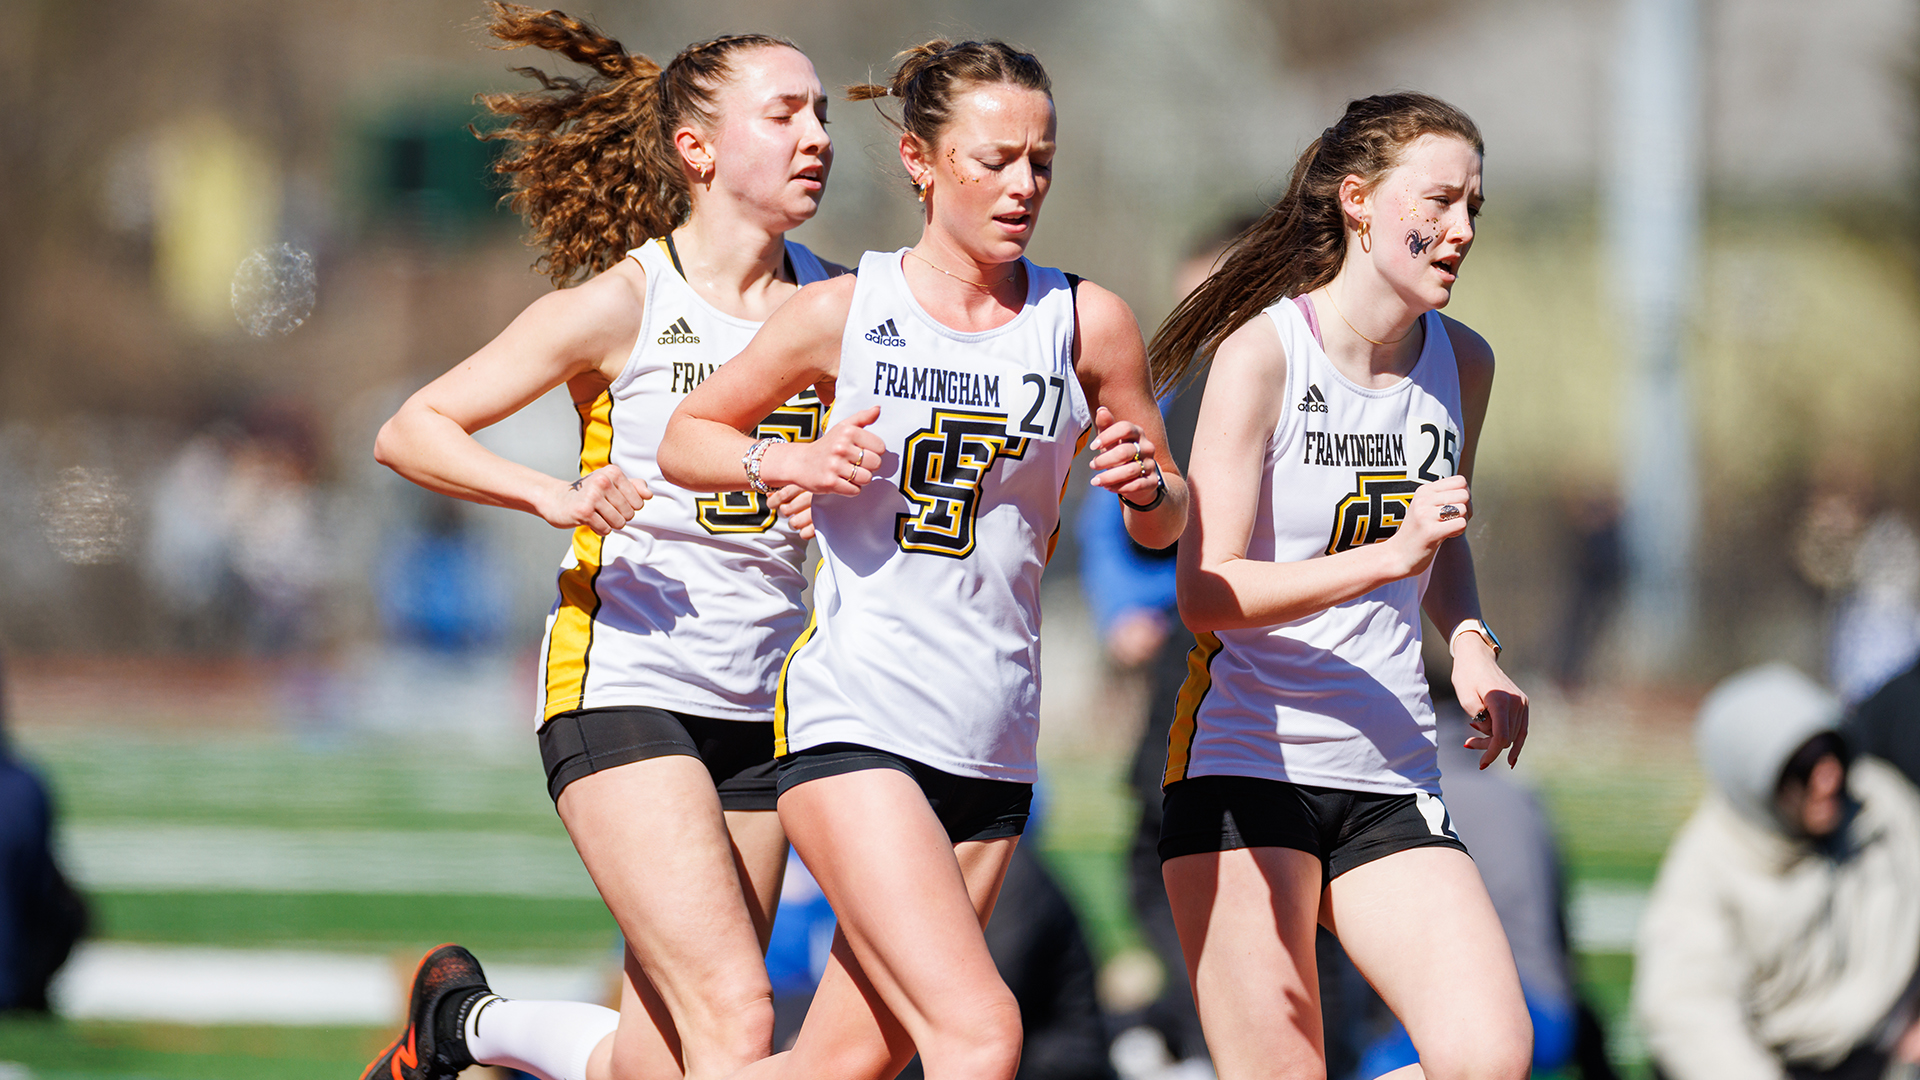 Women's Track and Field Finishes Third at MASCAC Championships